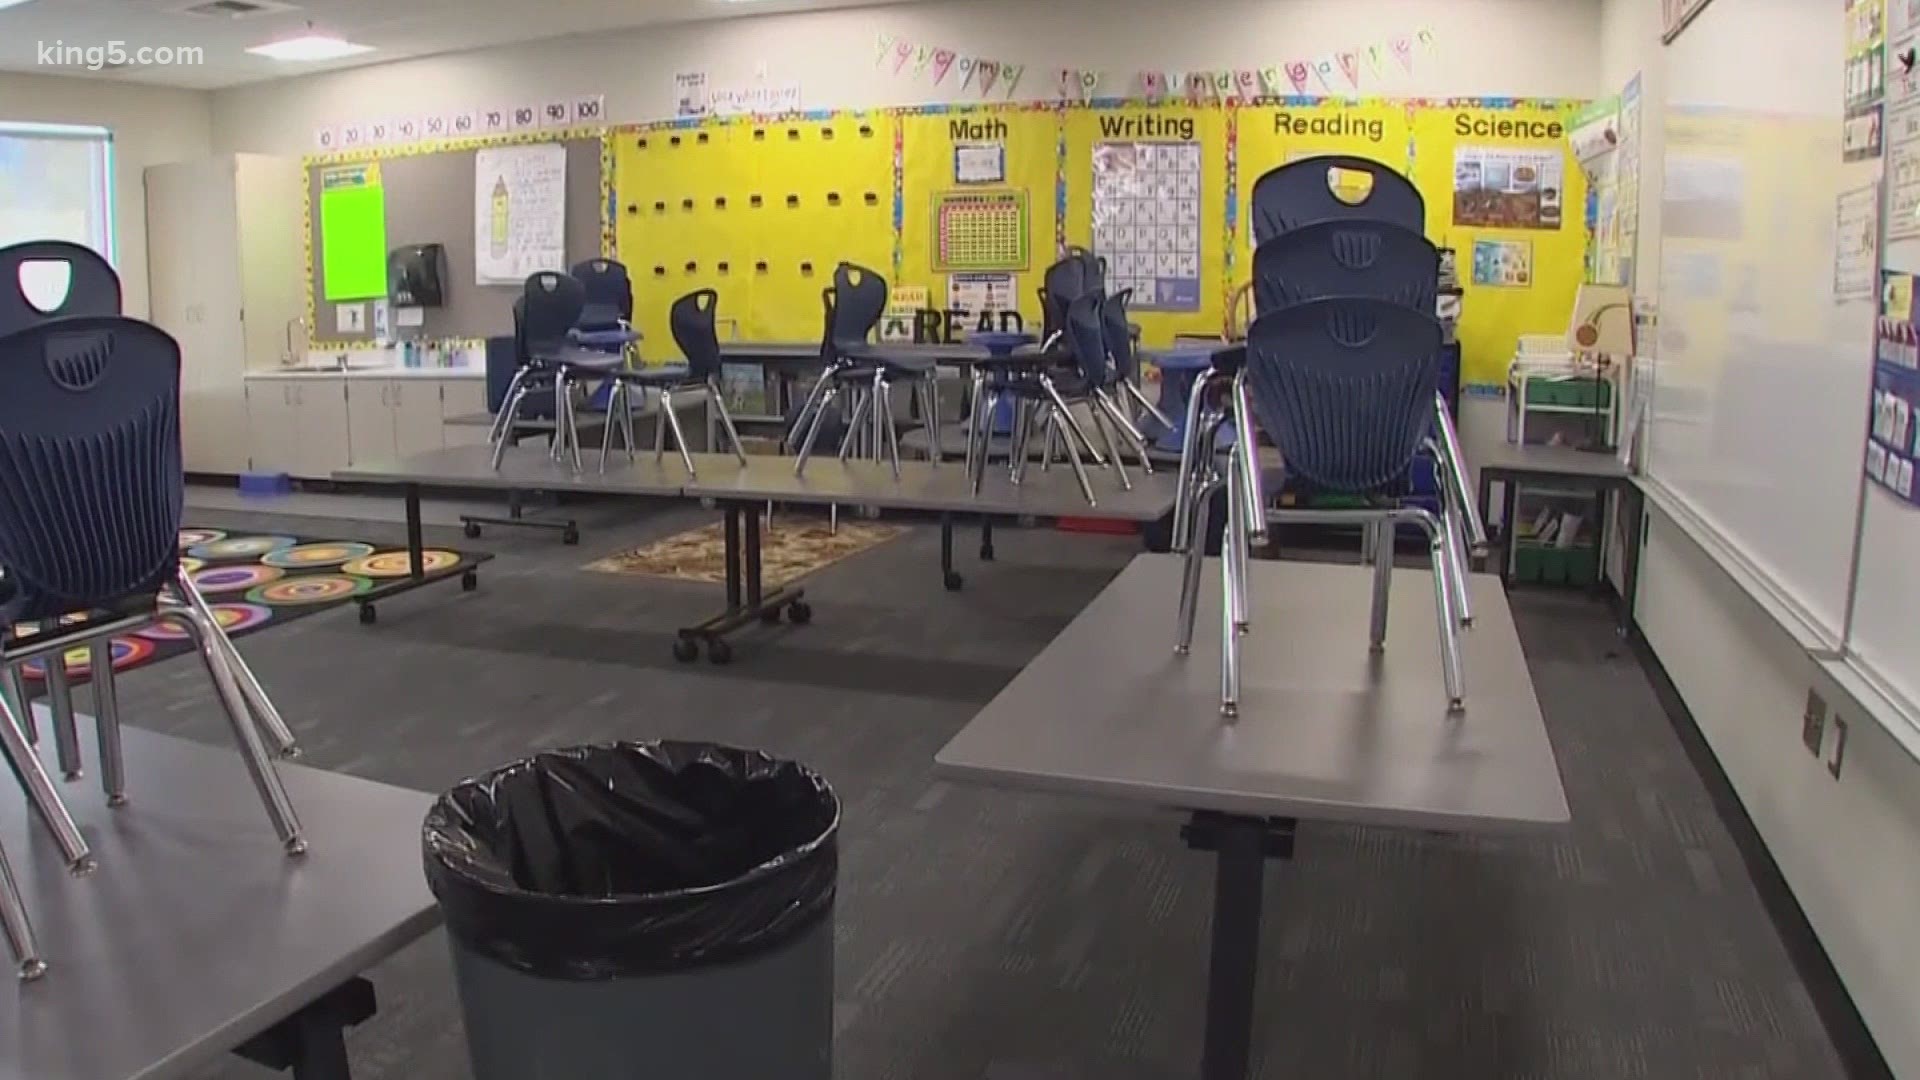 School districts across the state are closely monitoring the number of COVID-19 cases as they work to decide when students can safely go back to the classroom.